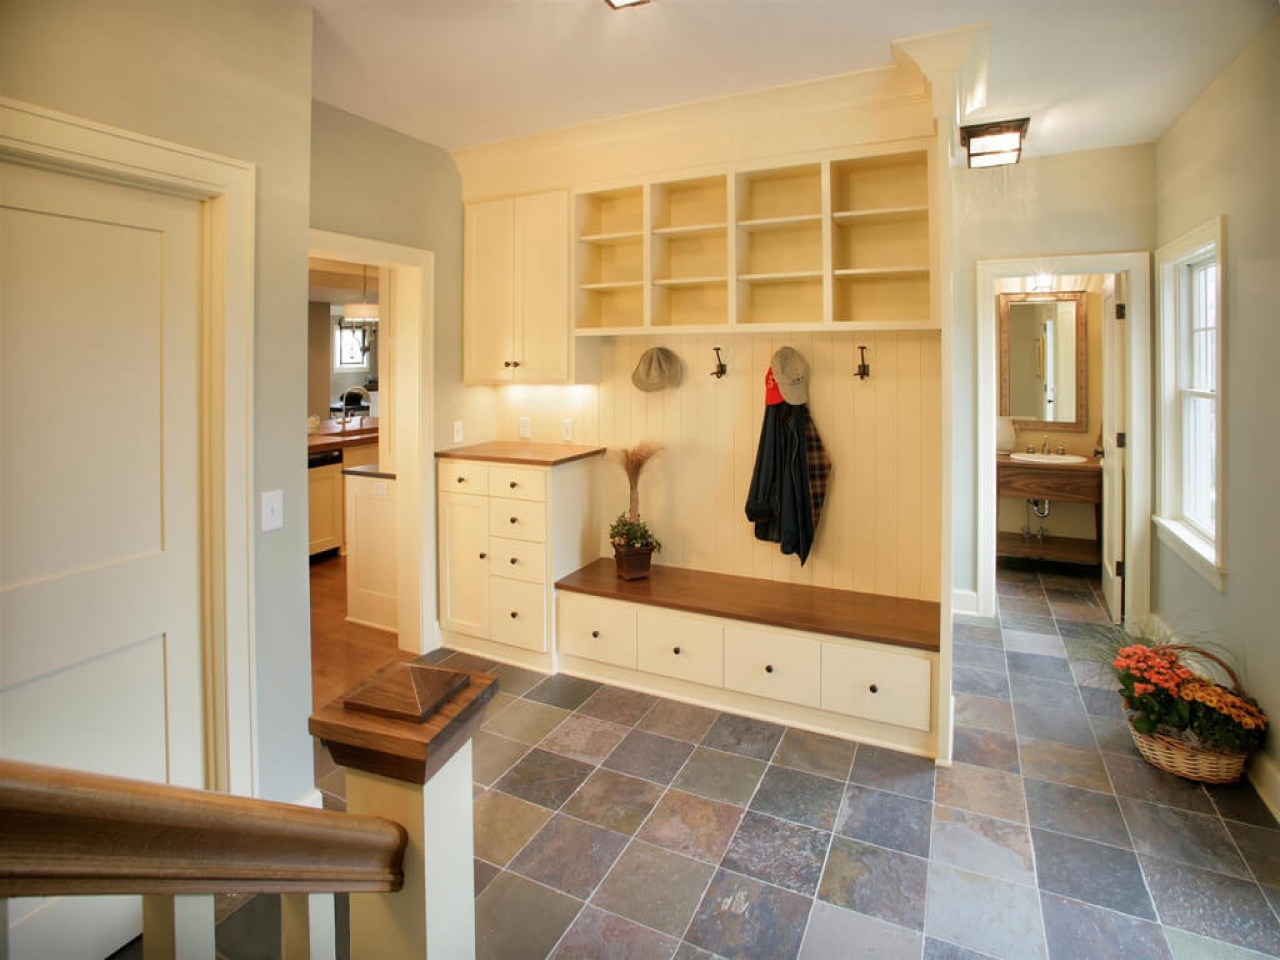 built-in-cabinetry-bench-cubby-holes-and-drawers-under-the-bench